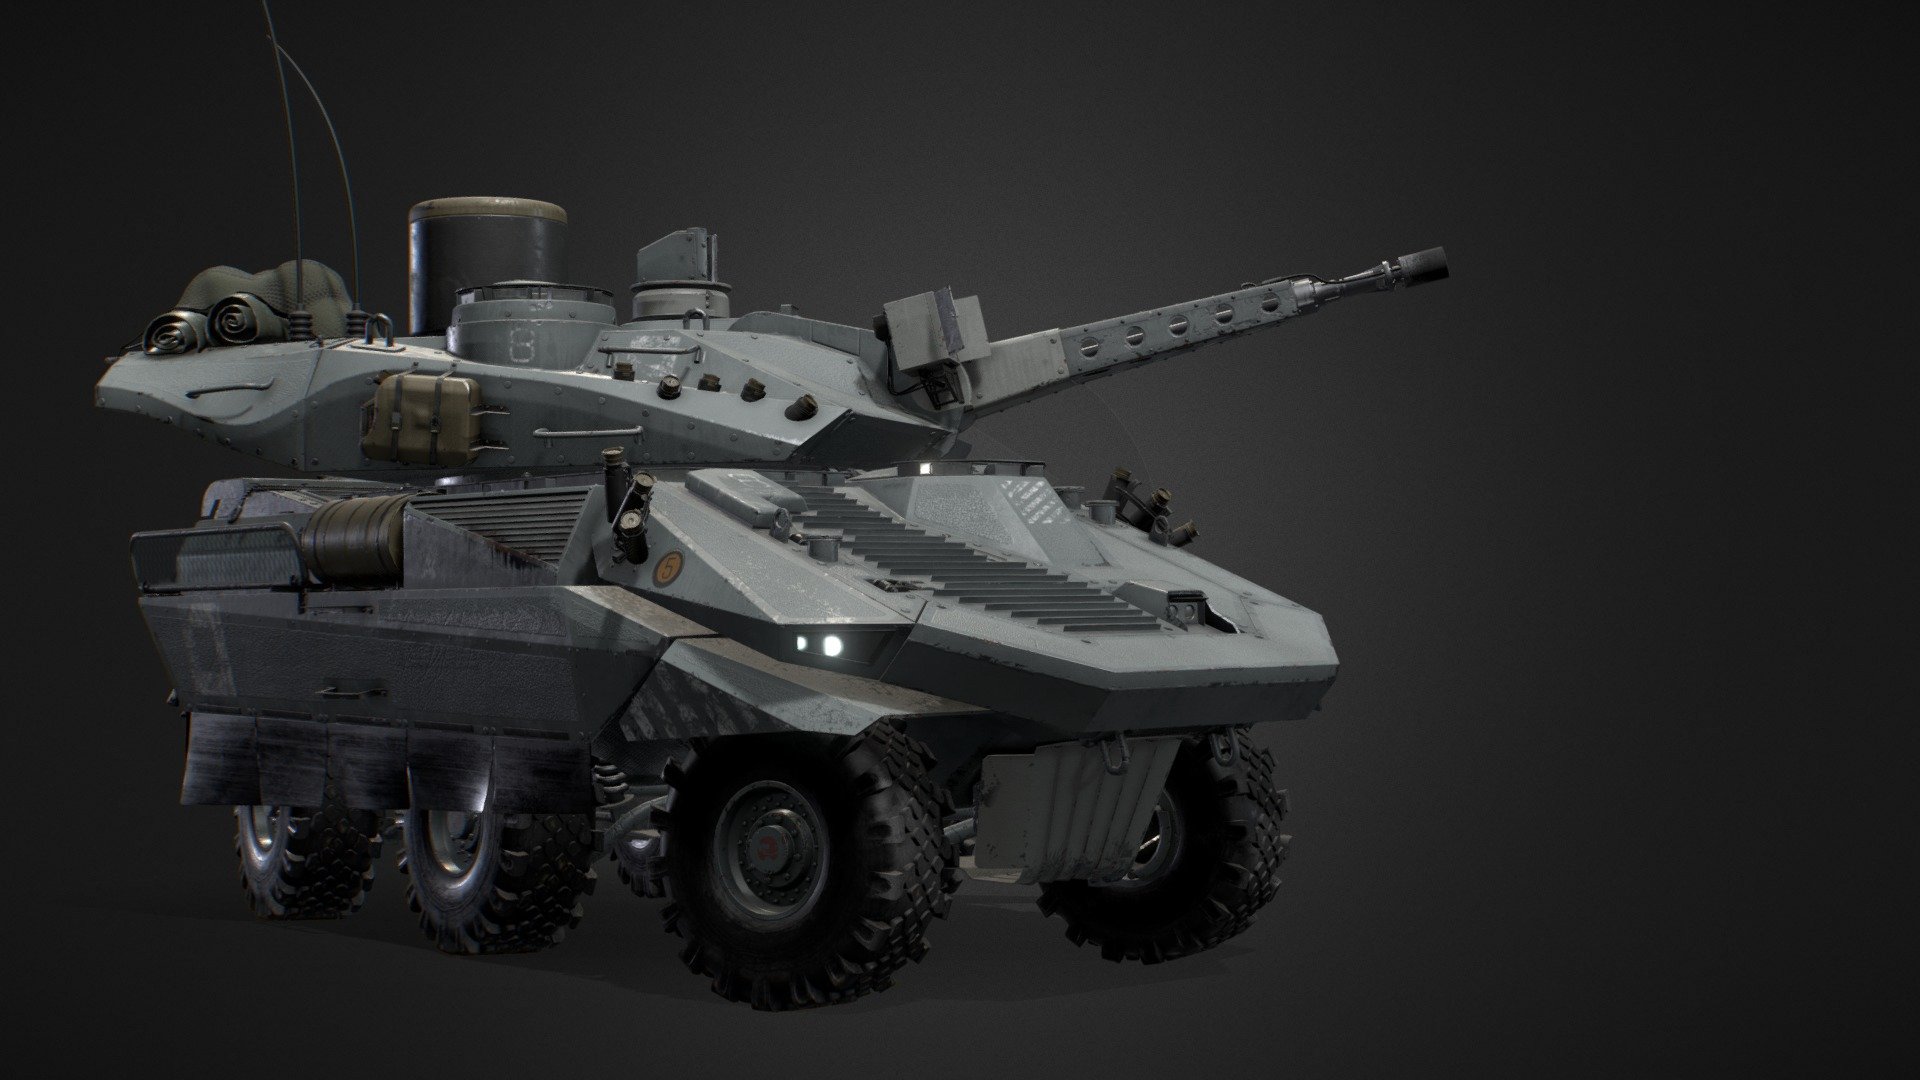 This is of my Concept of infantry fighting vehicle (IFV) named &ldquo;Shark